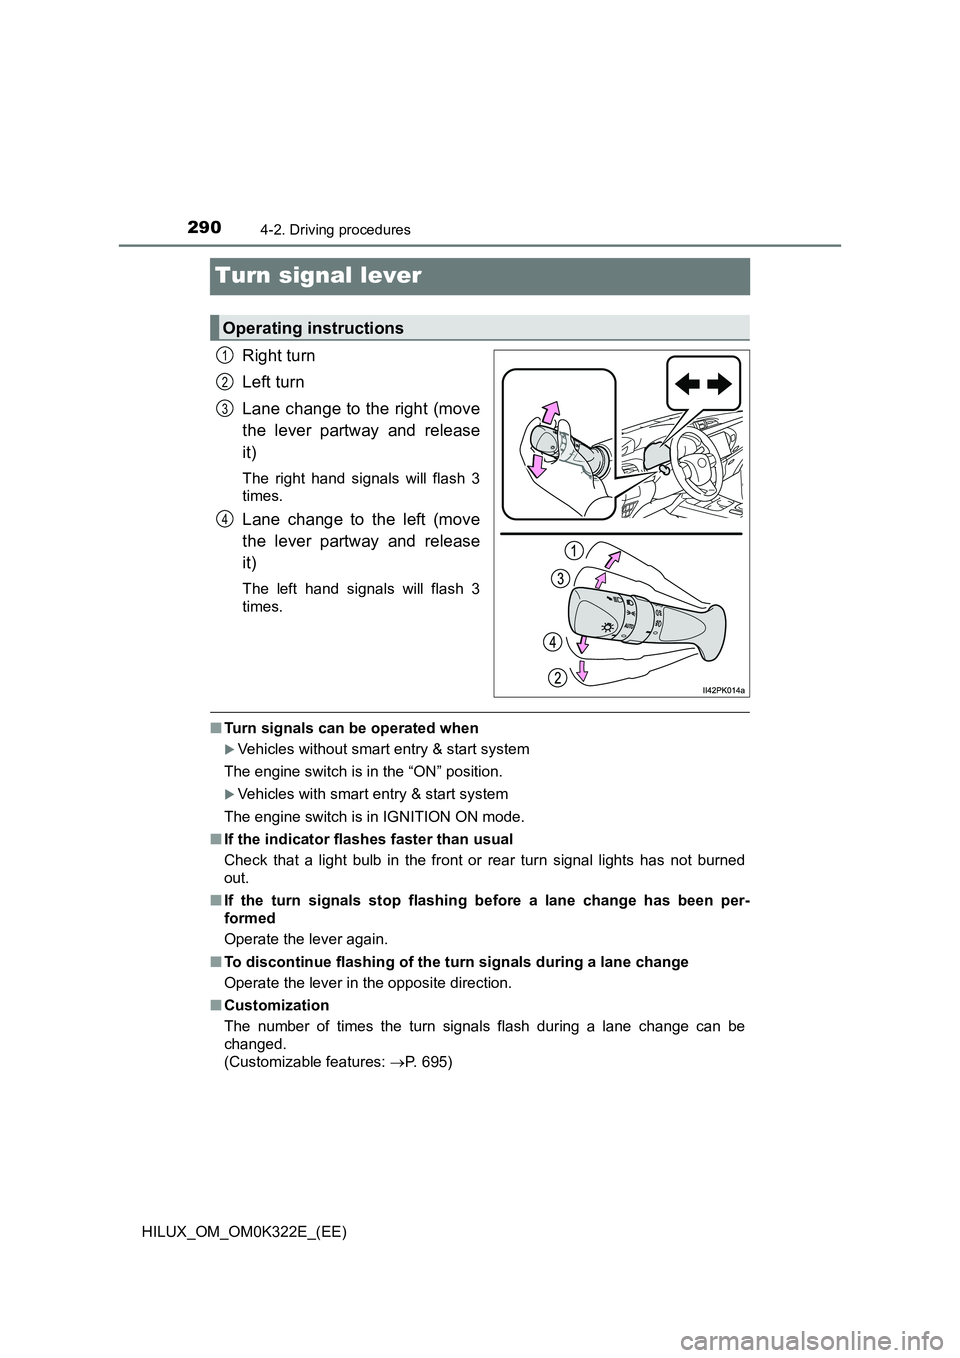 TOYOTA HILUX 2017  Owners Manual (in English) 2904-2. Driving procedures
HILUX_OM_OM0K322E_(EE)
Turn signal lever
Right turn 
Left turn 
Lane change to the right (move 
the lever partway and release 
it)
The right hand signals will flash 3 
times